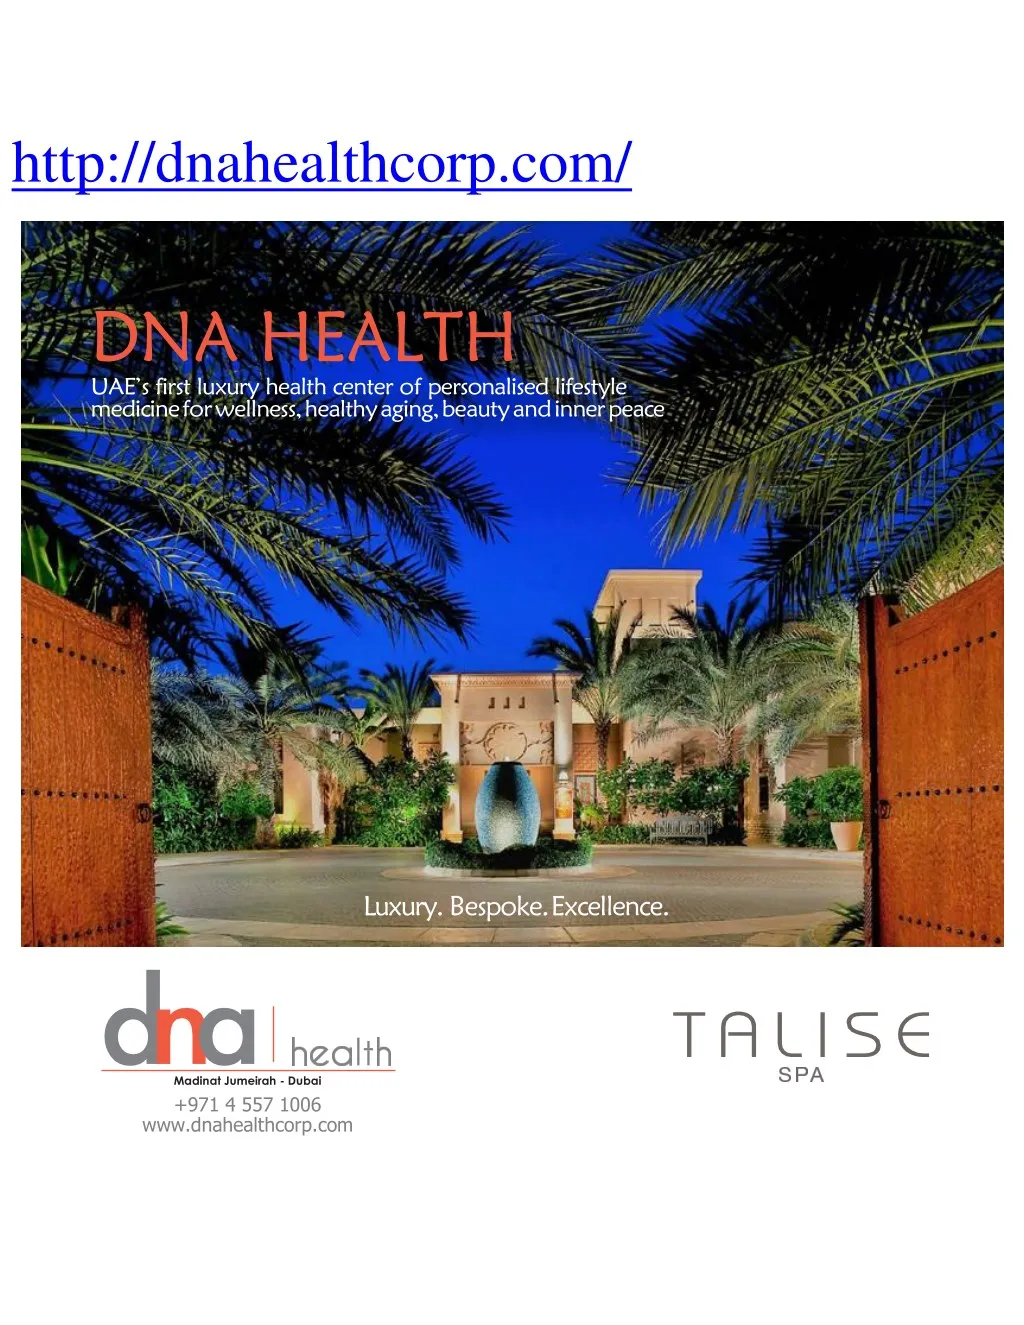 http dnahealthcorp com dna health uae s first